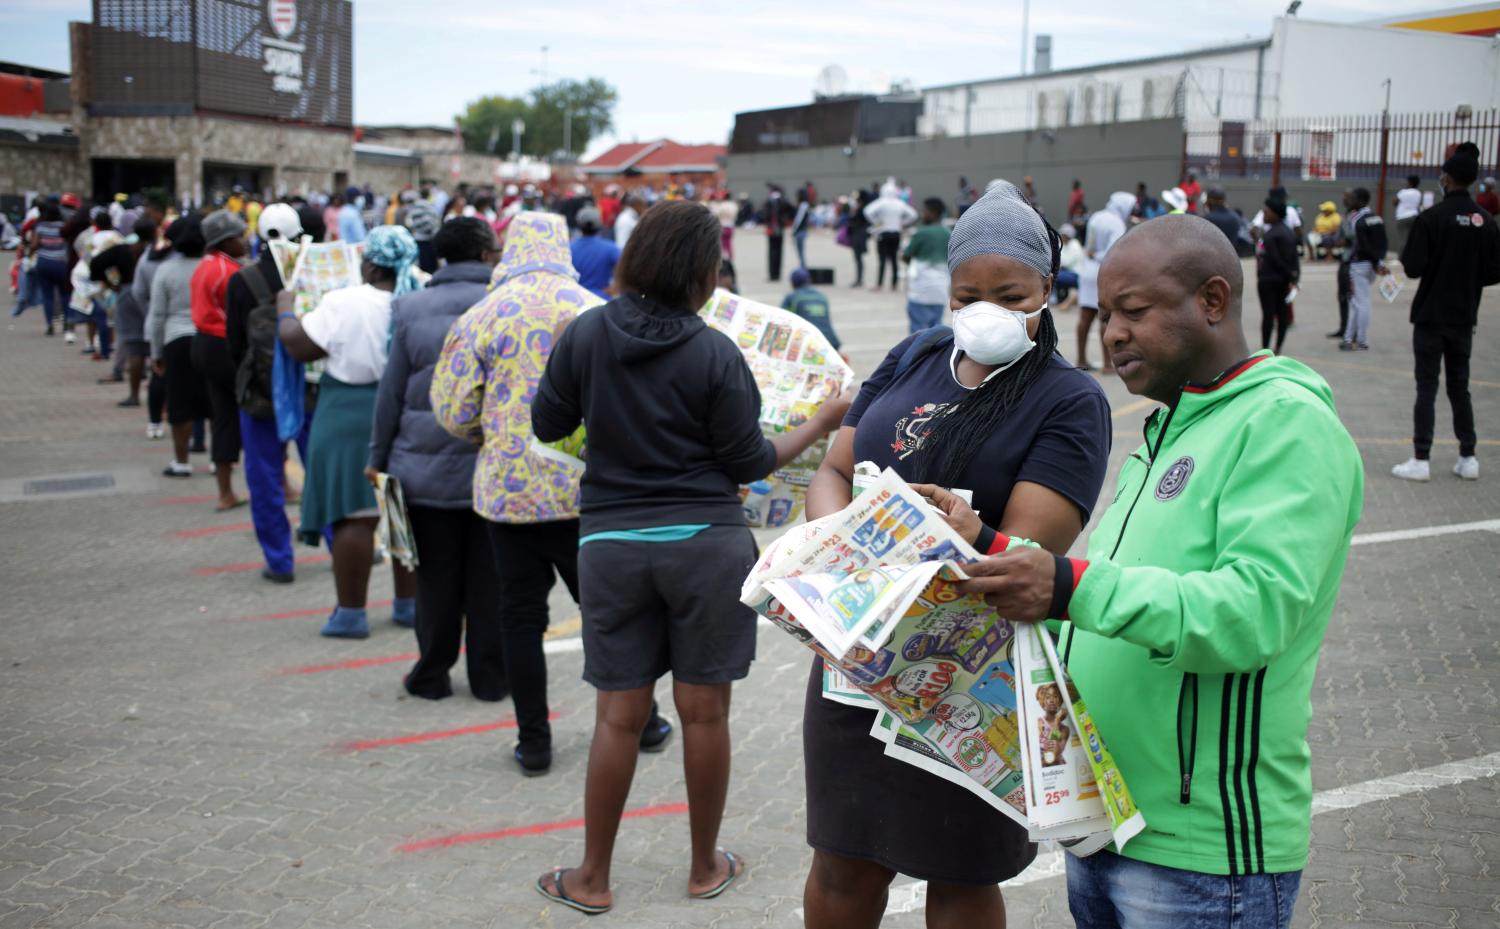 FILE PHOTO: Shoppers queue outside a grocery store during a 21 day nationwide lockdown, aimed at limiting the spread of coronavirus disease (COVID-19) in Soweto, South Africa, March 30, 2020. REUTERS/Siphiwe Sibeko/File Photo